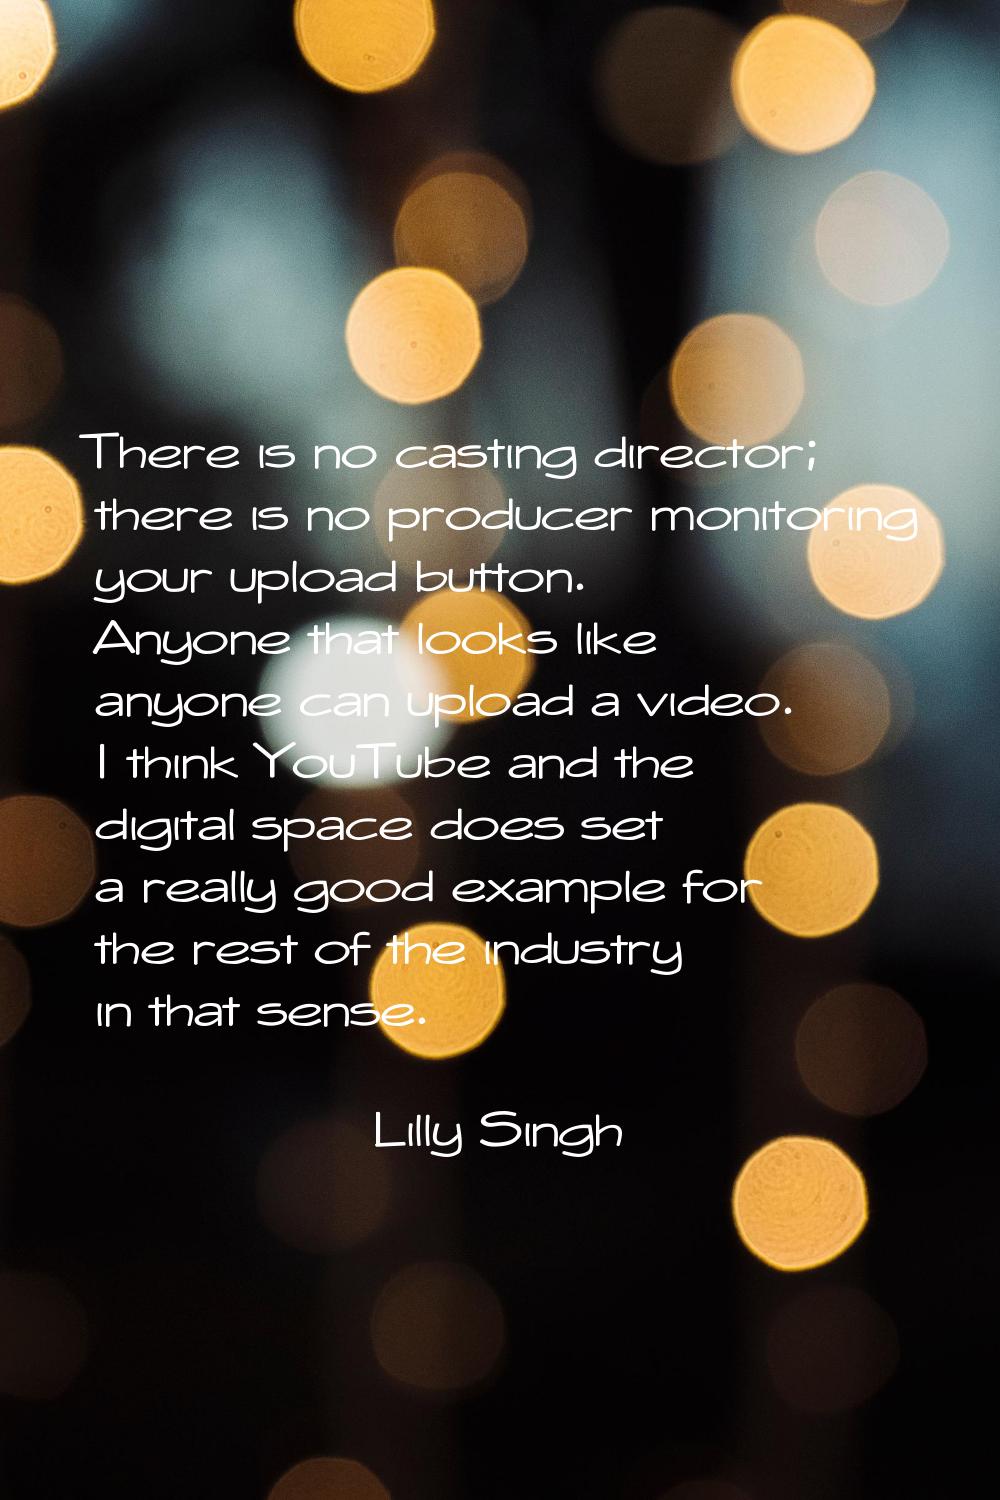 There is no casting director; there is no producer monitoring your upload button. Anyone that looks